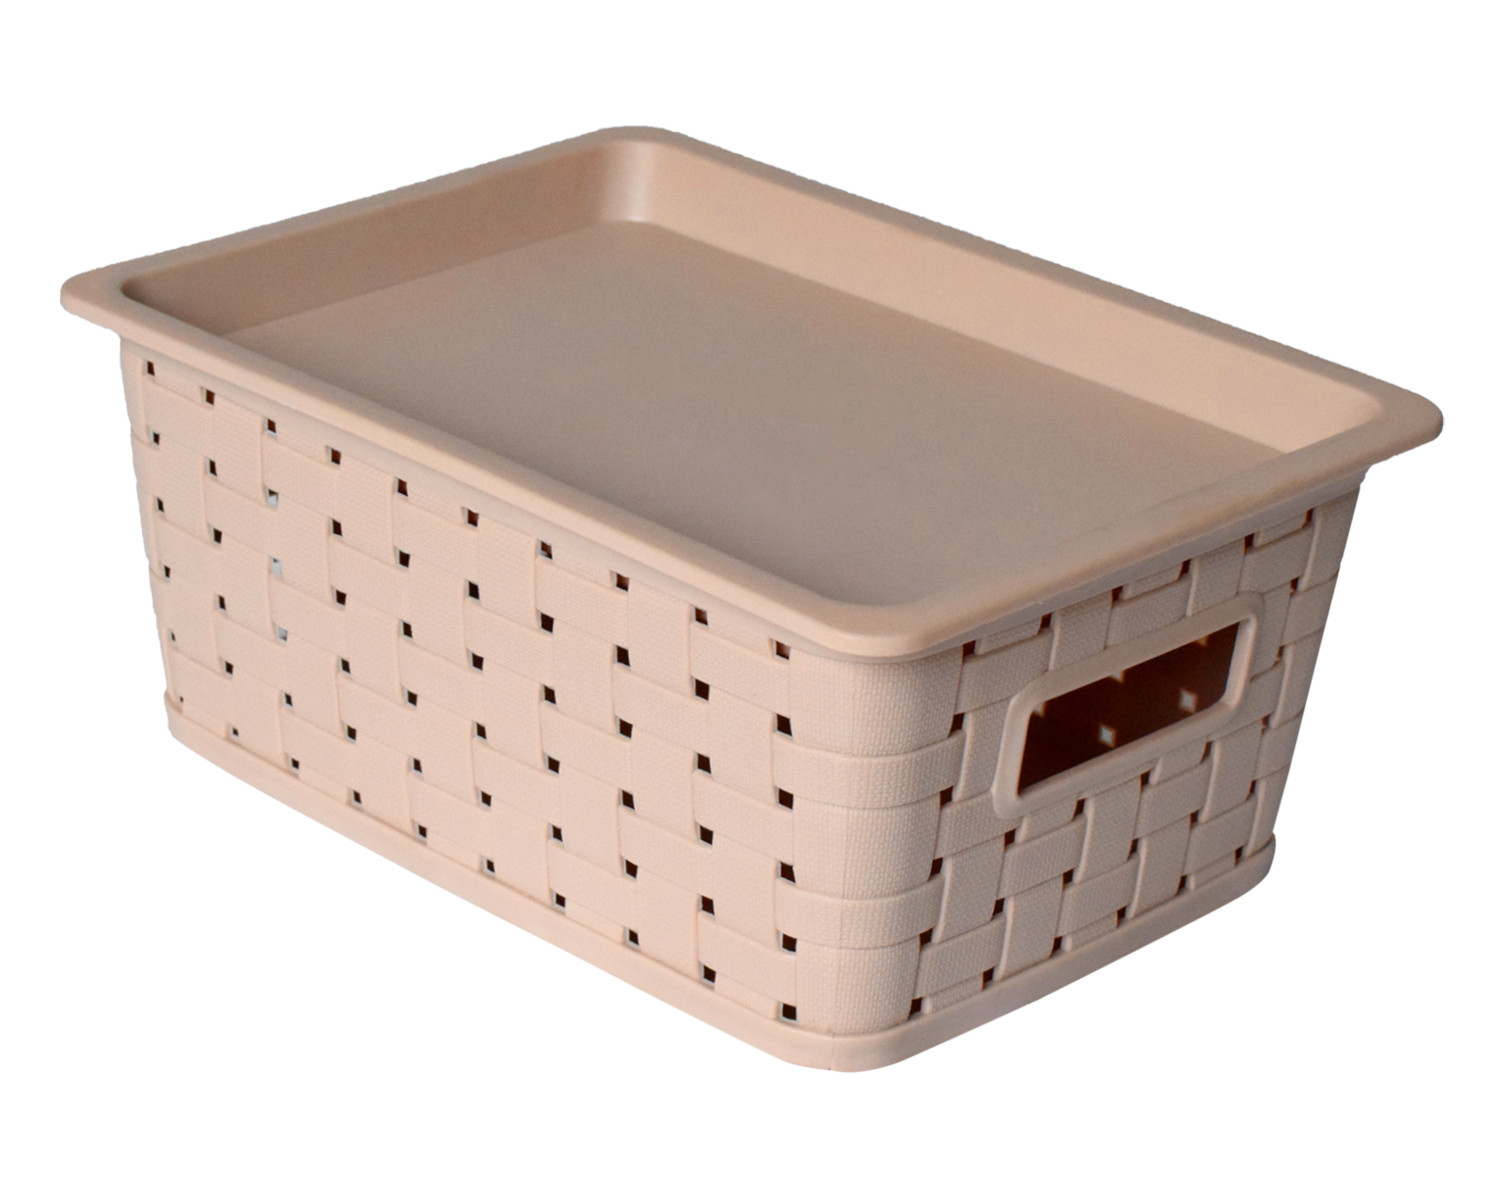 Kuber Industries BPA Free Attractive Design Multipurpose Small Trendy Storage Basket With Lid|Material-Plastic|Color-Light Brown|Pack of 2